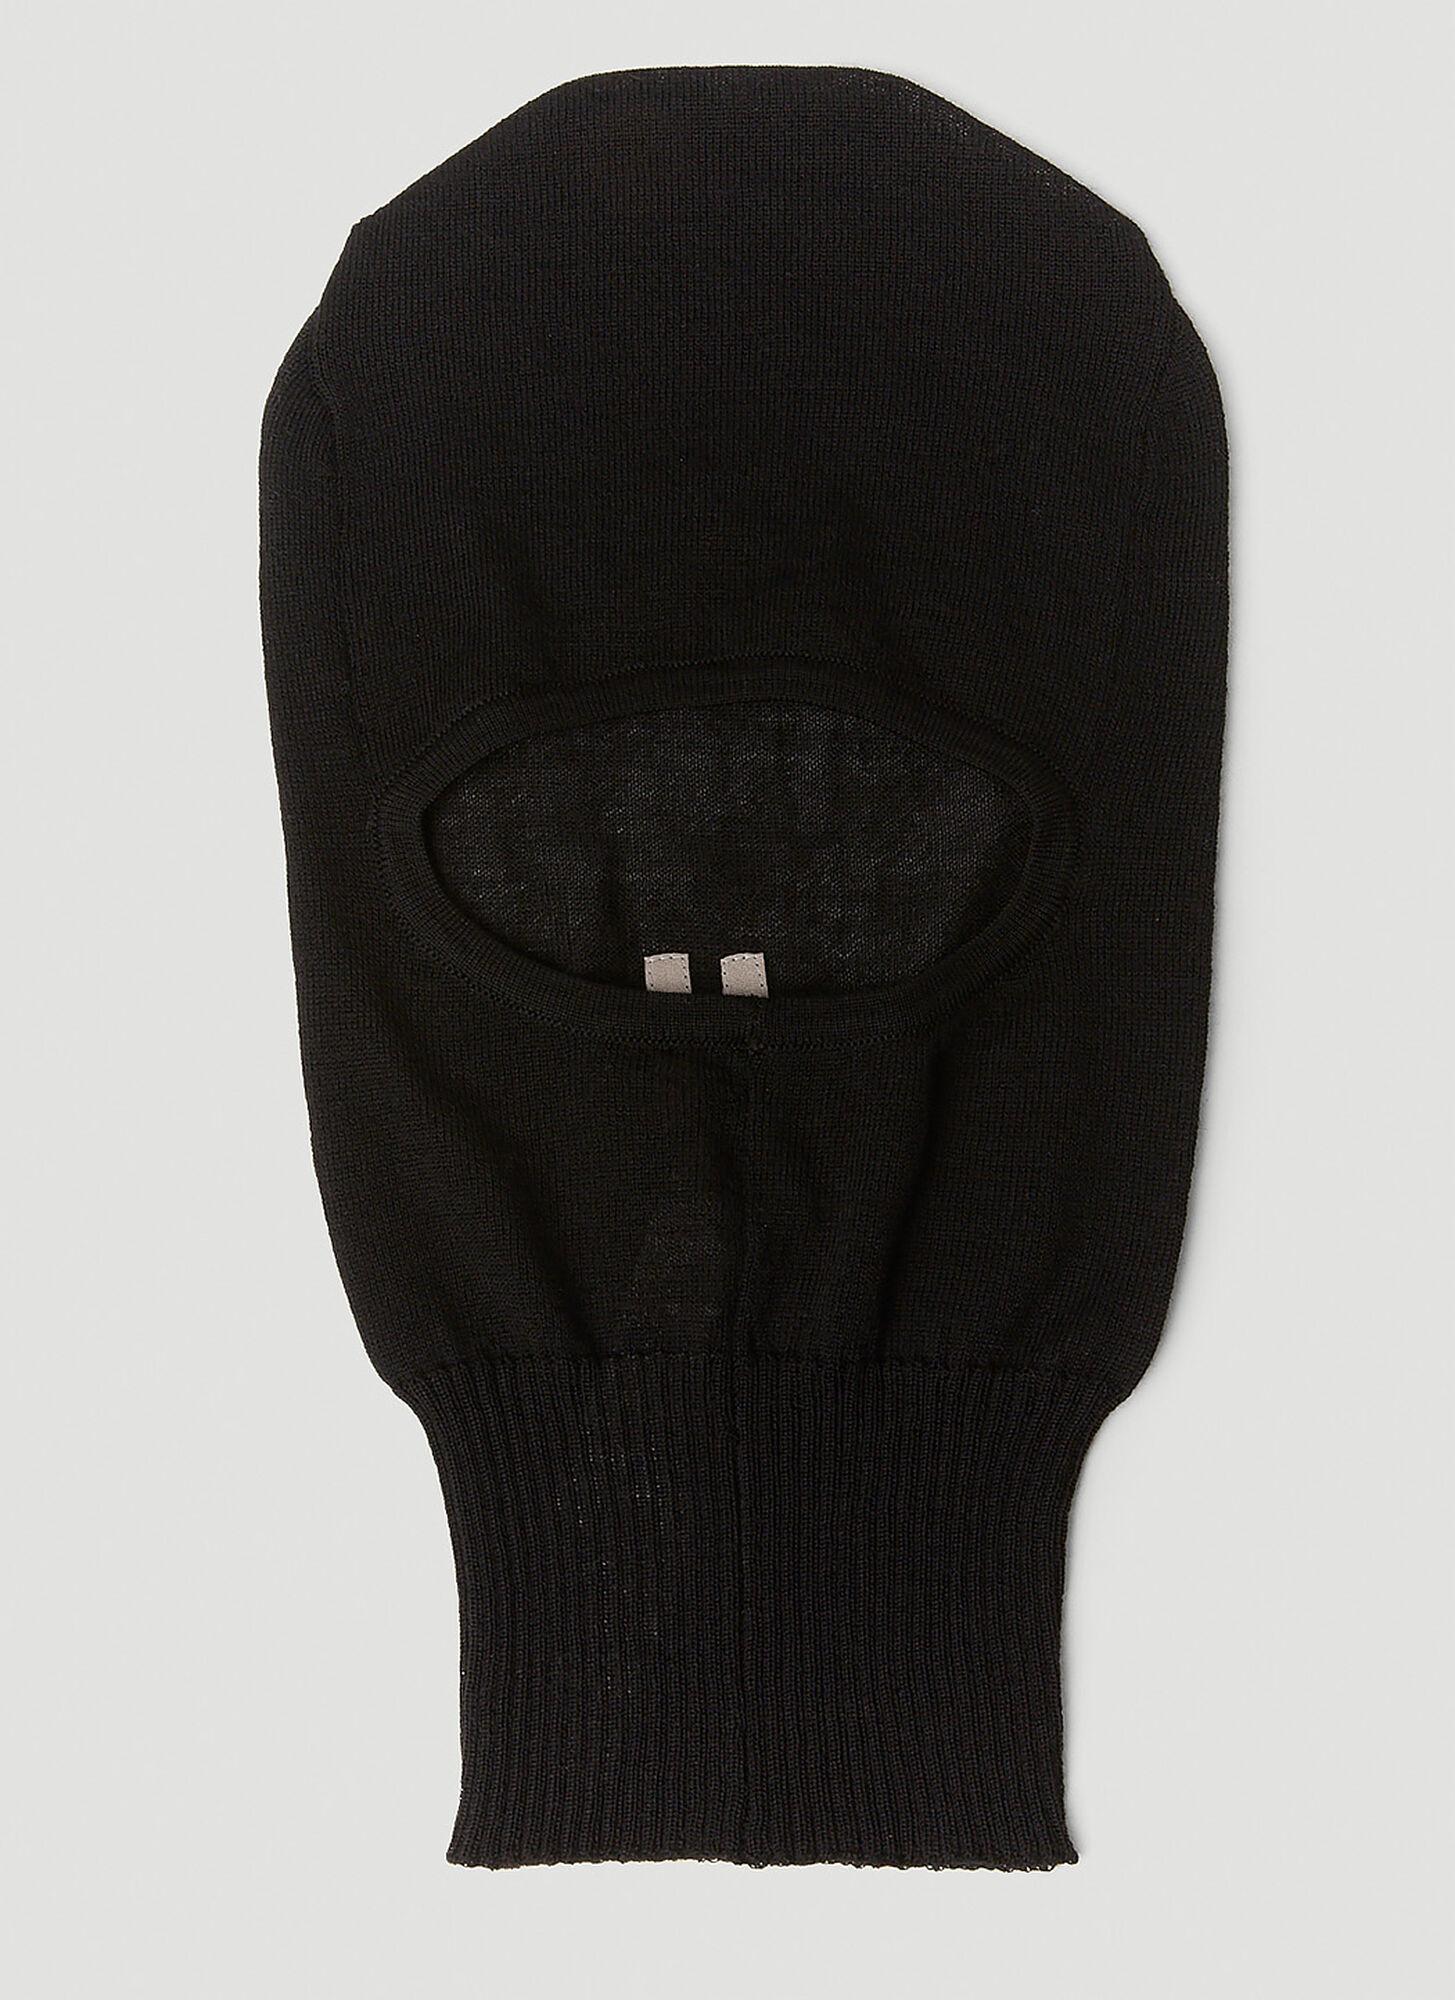 Rick Owens Ribbed Knit Balaclava in Black for Men | Lyst